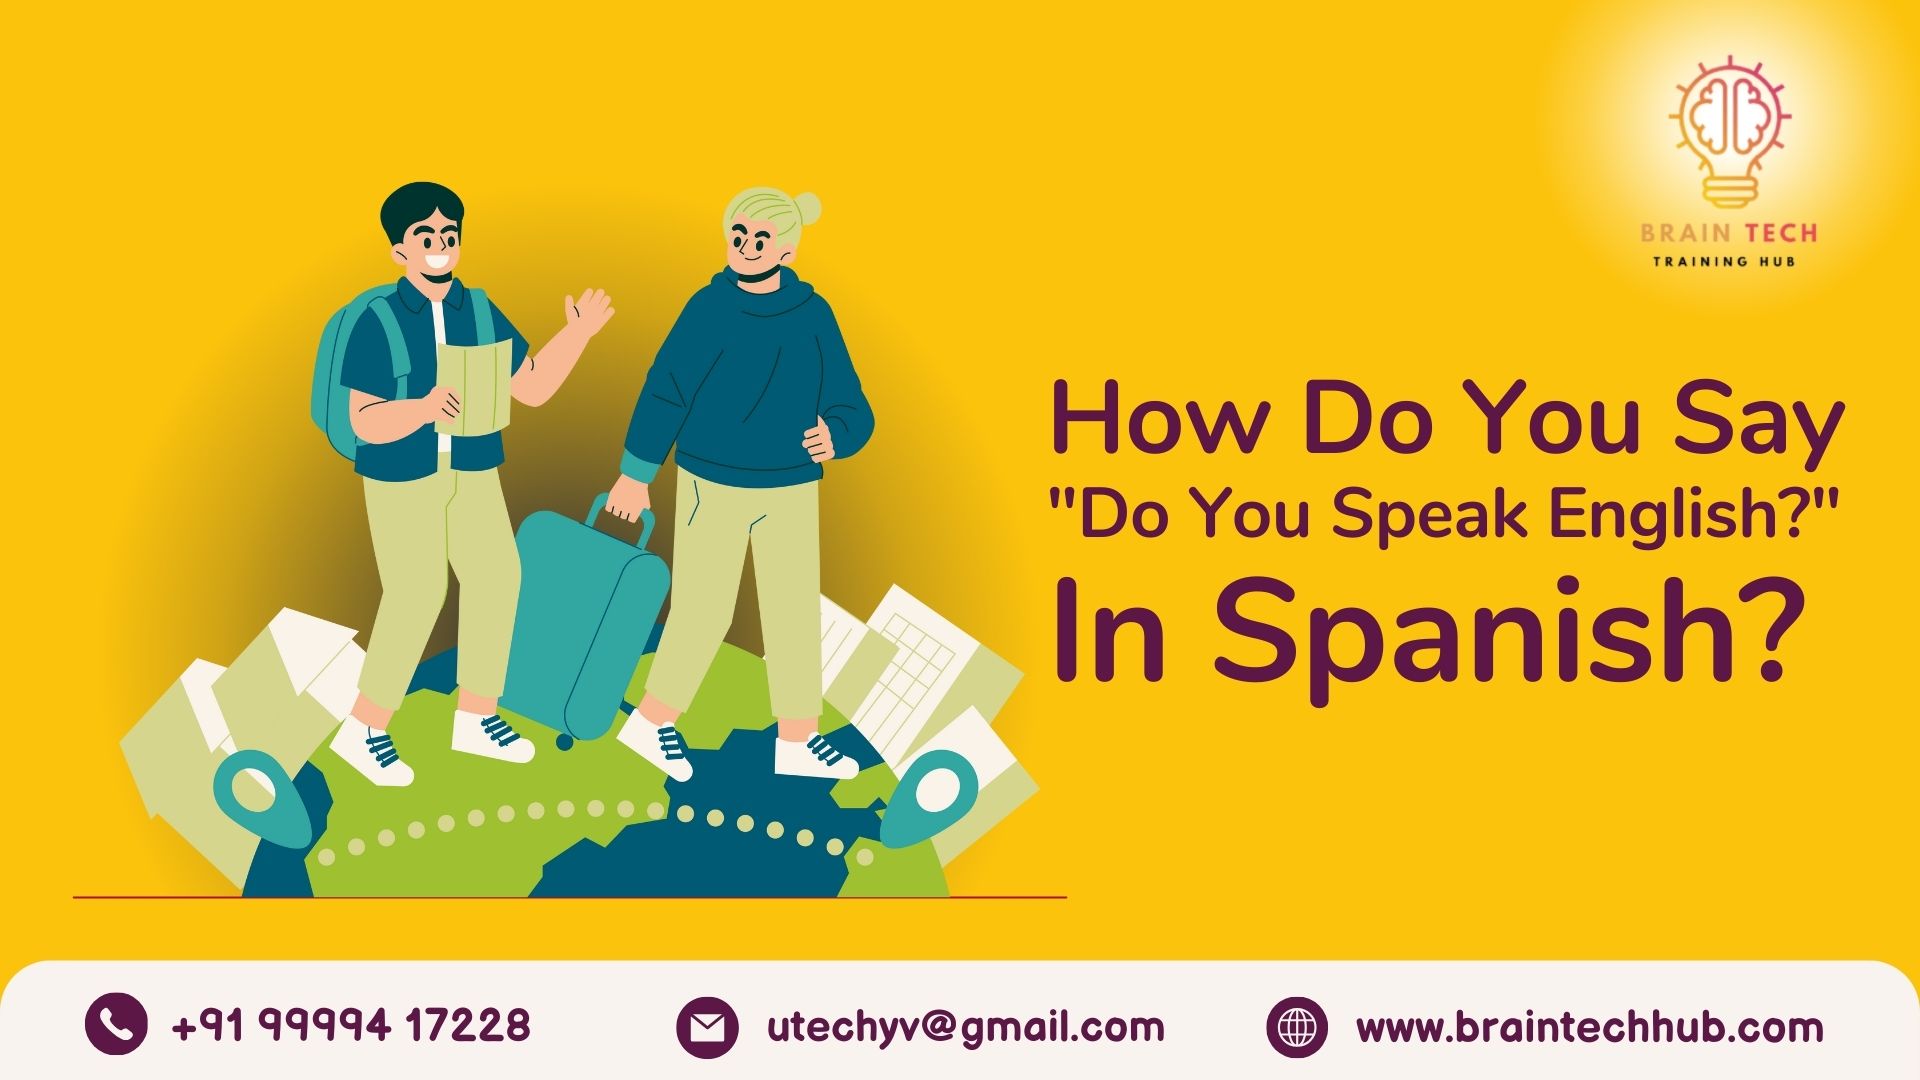 How Do You Say "Do You Speak English?" In Spanish?